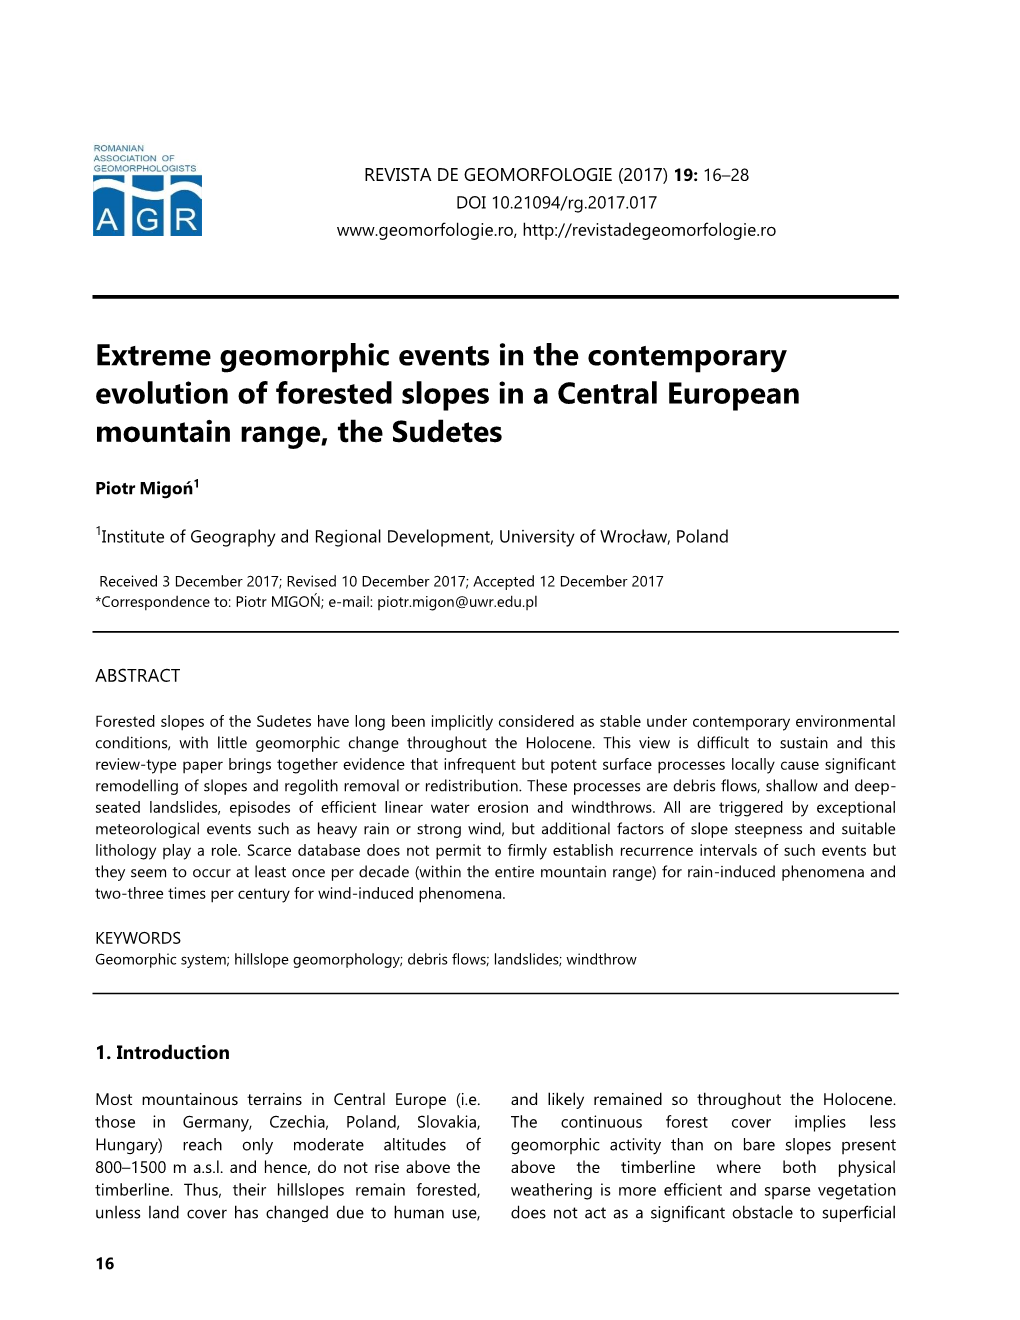 Extreme Geomorphic Events in the Contemporary Evolution of Forested Slopes in a Central European Mountain Range, the Sudetes